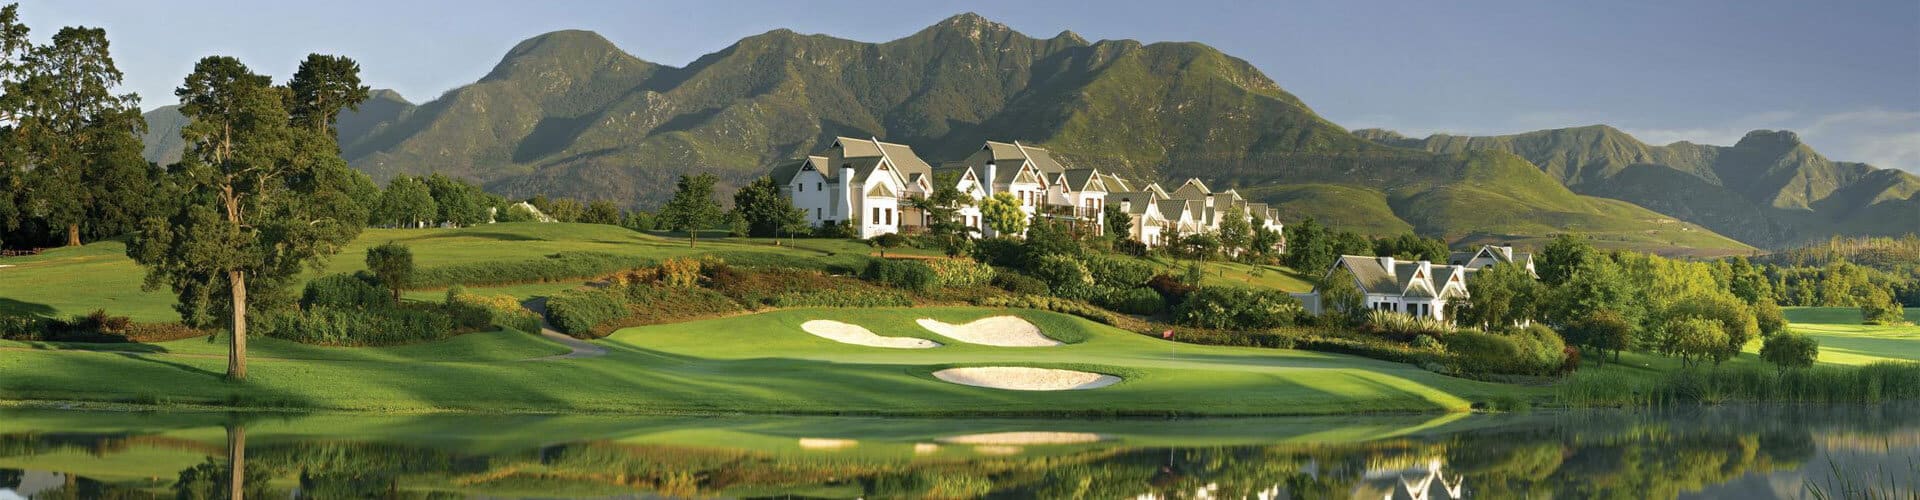 The spectacular Fancourt Links golf course in the Wilderness, South Africa.